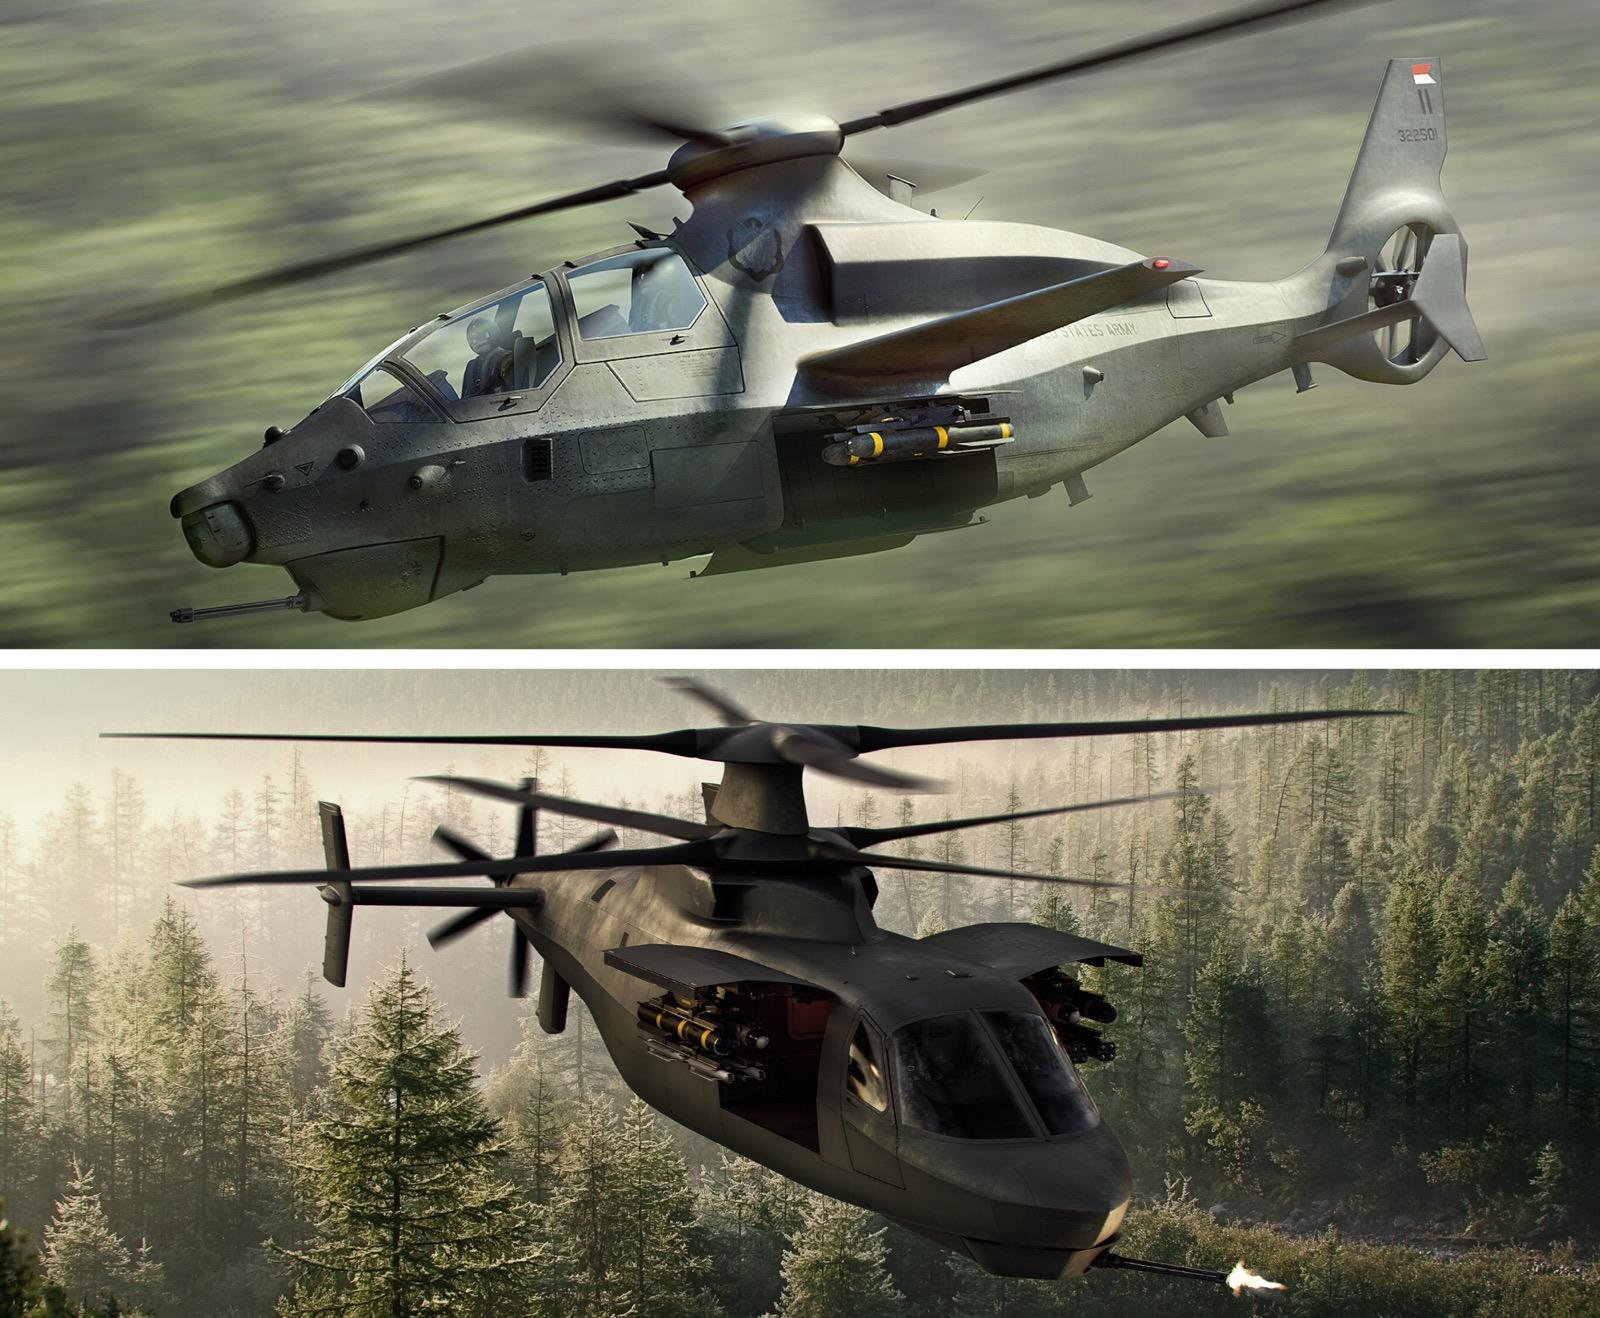 The competing designs for the U.S. Army's Future Attack Reconnaissance Aircraft program: The Bell 360 Invictus (top) and the Sikorsky Raider X (bottom). Bell and Sikorsky Images